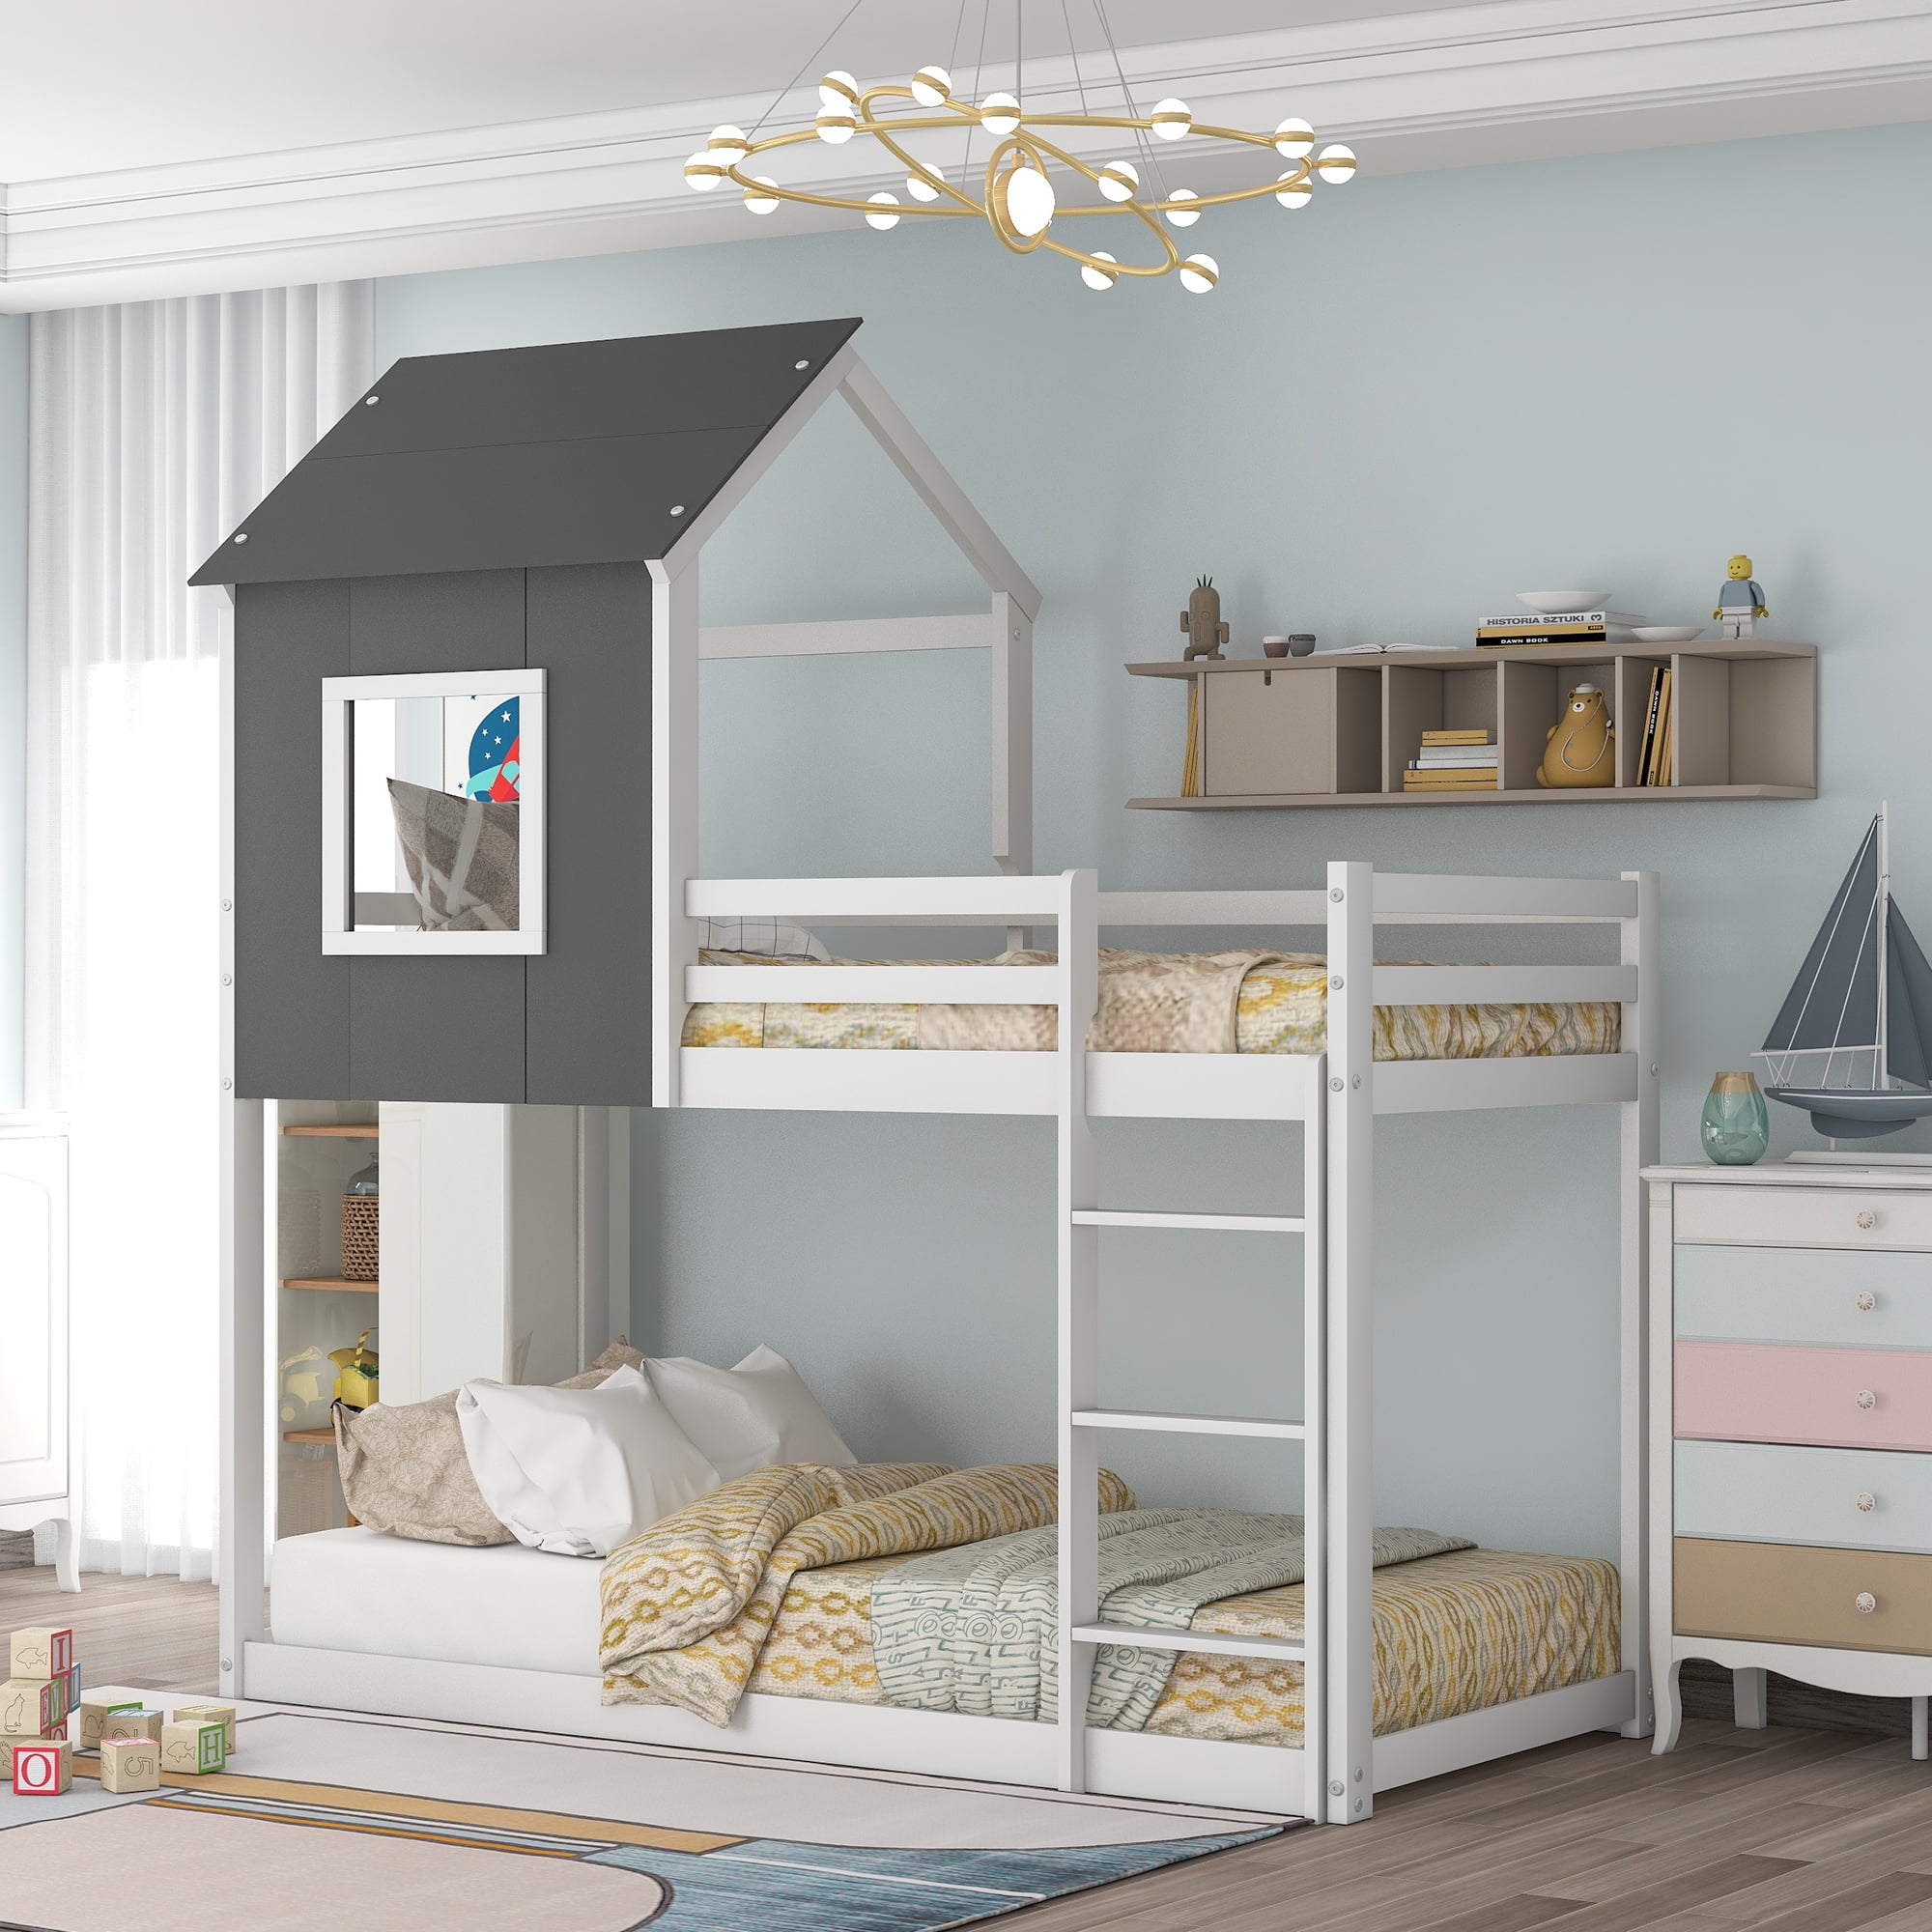 Storkcraft Caribou Twin Over Solid, Storkcraft Caribou Solid Hardwood Twin Bunk Bed Espresso